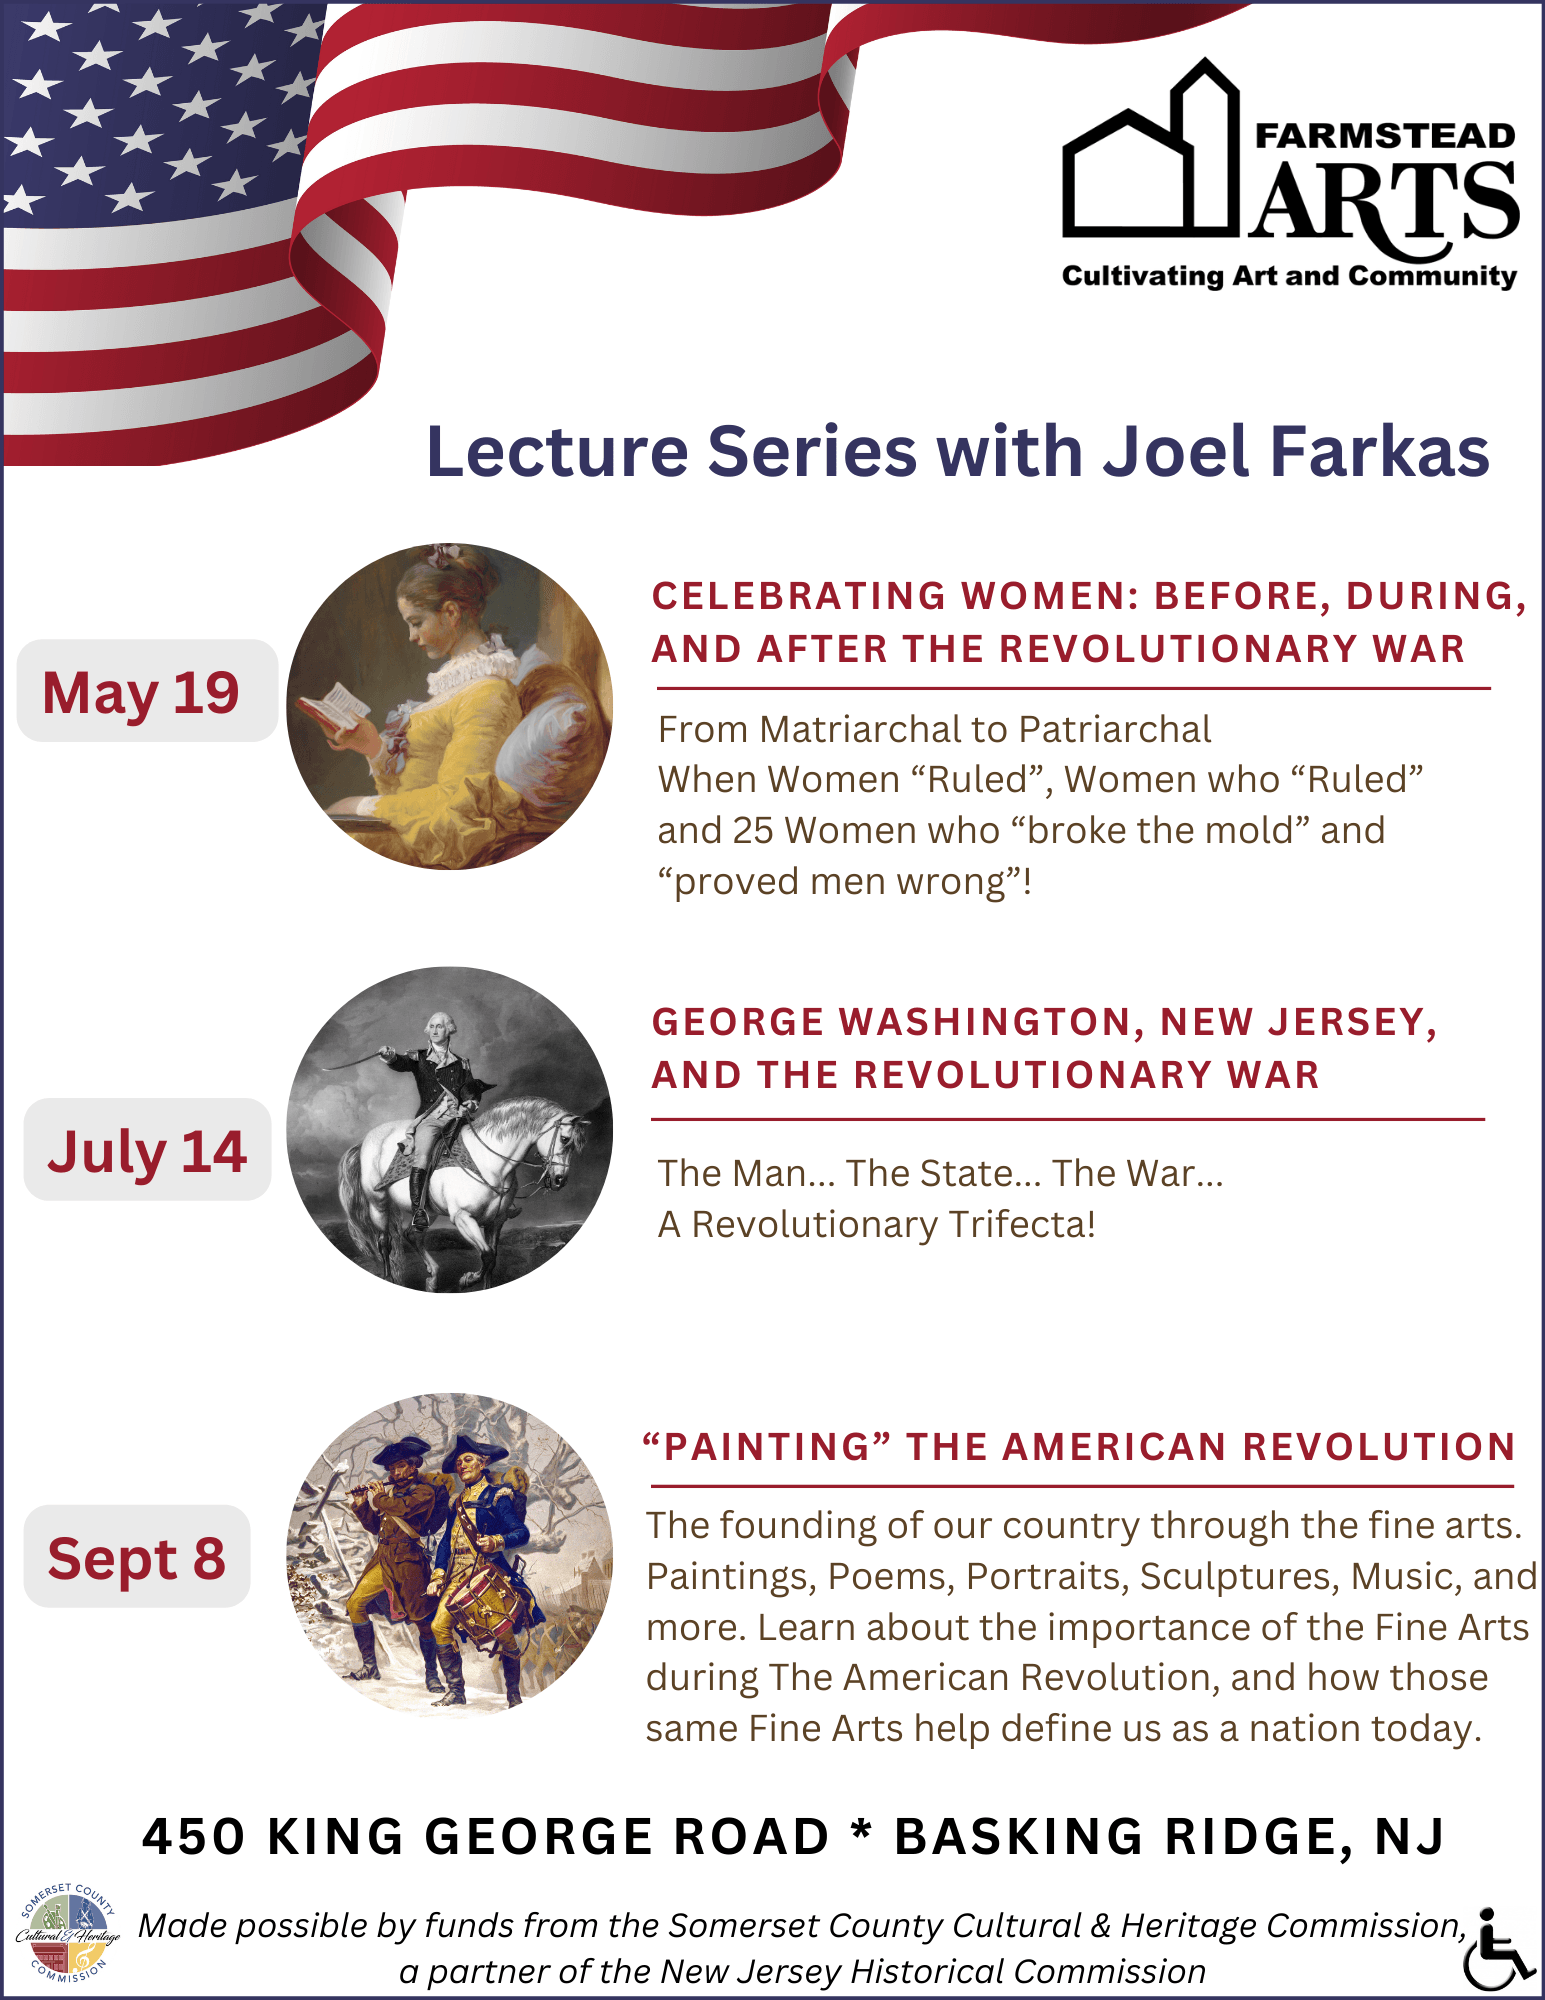 Information regarding three lectures featuring historical figures from the Revolutionary War period 